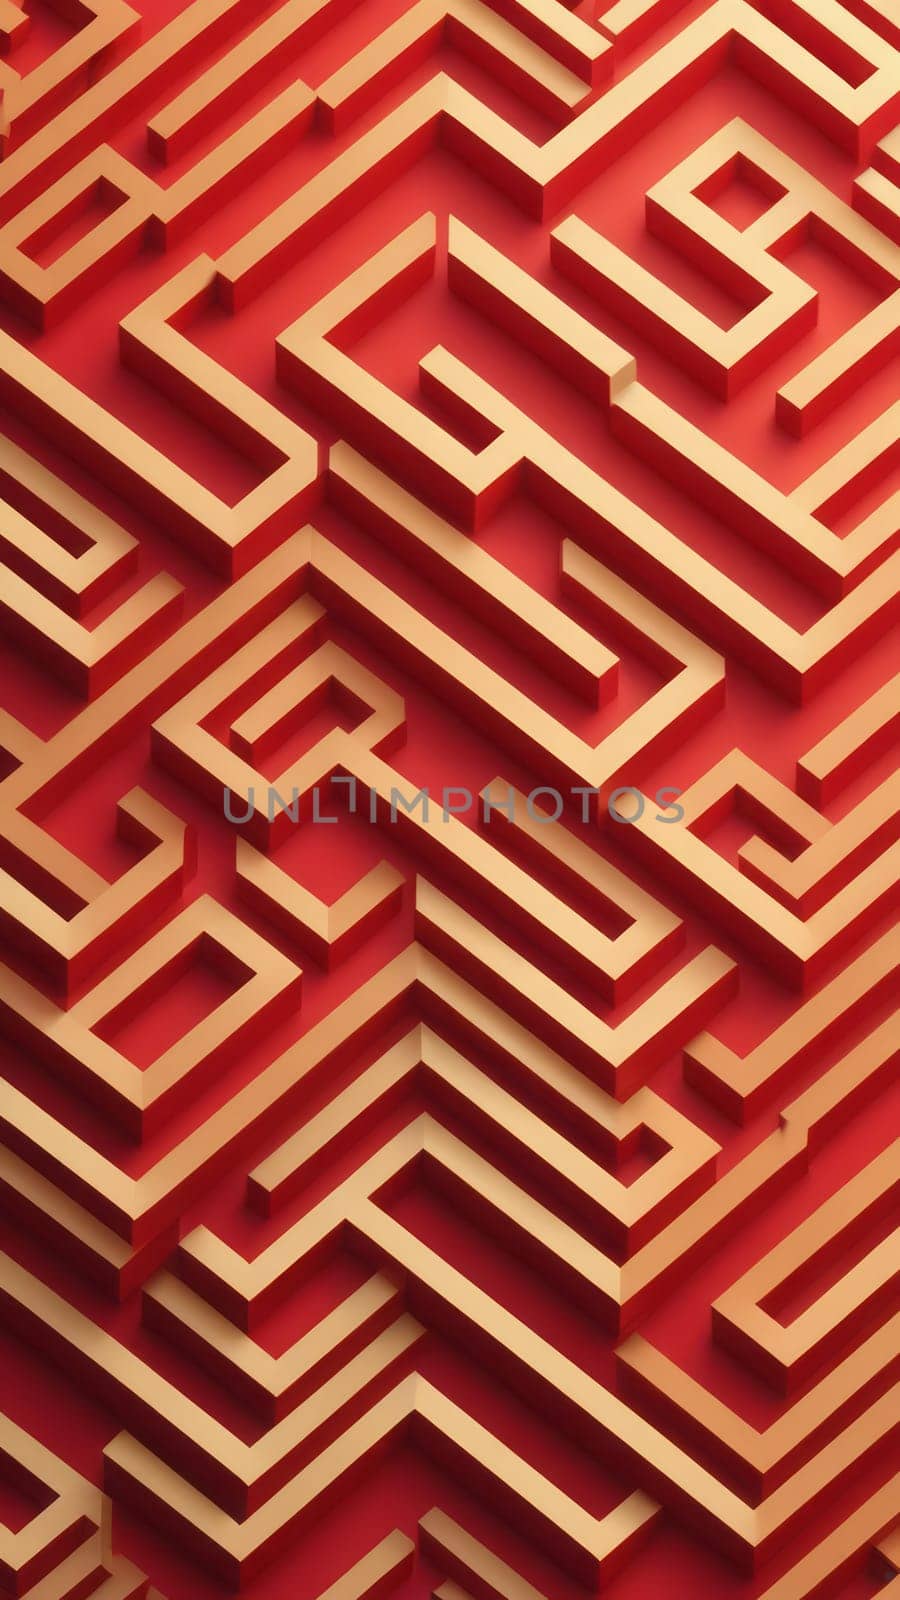 Background from Labyrinth shapes and red by nkotlyar